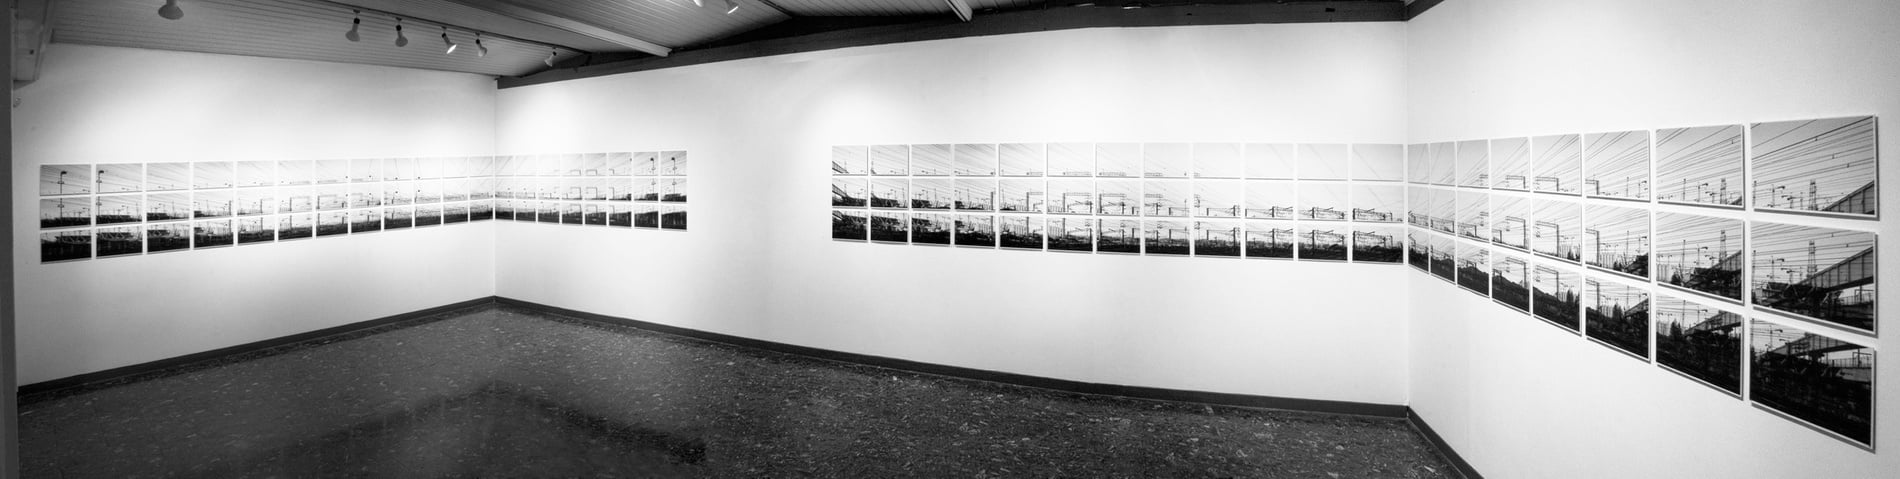 Surface Tension 1 and 2, installation view